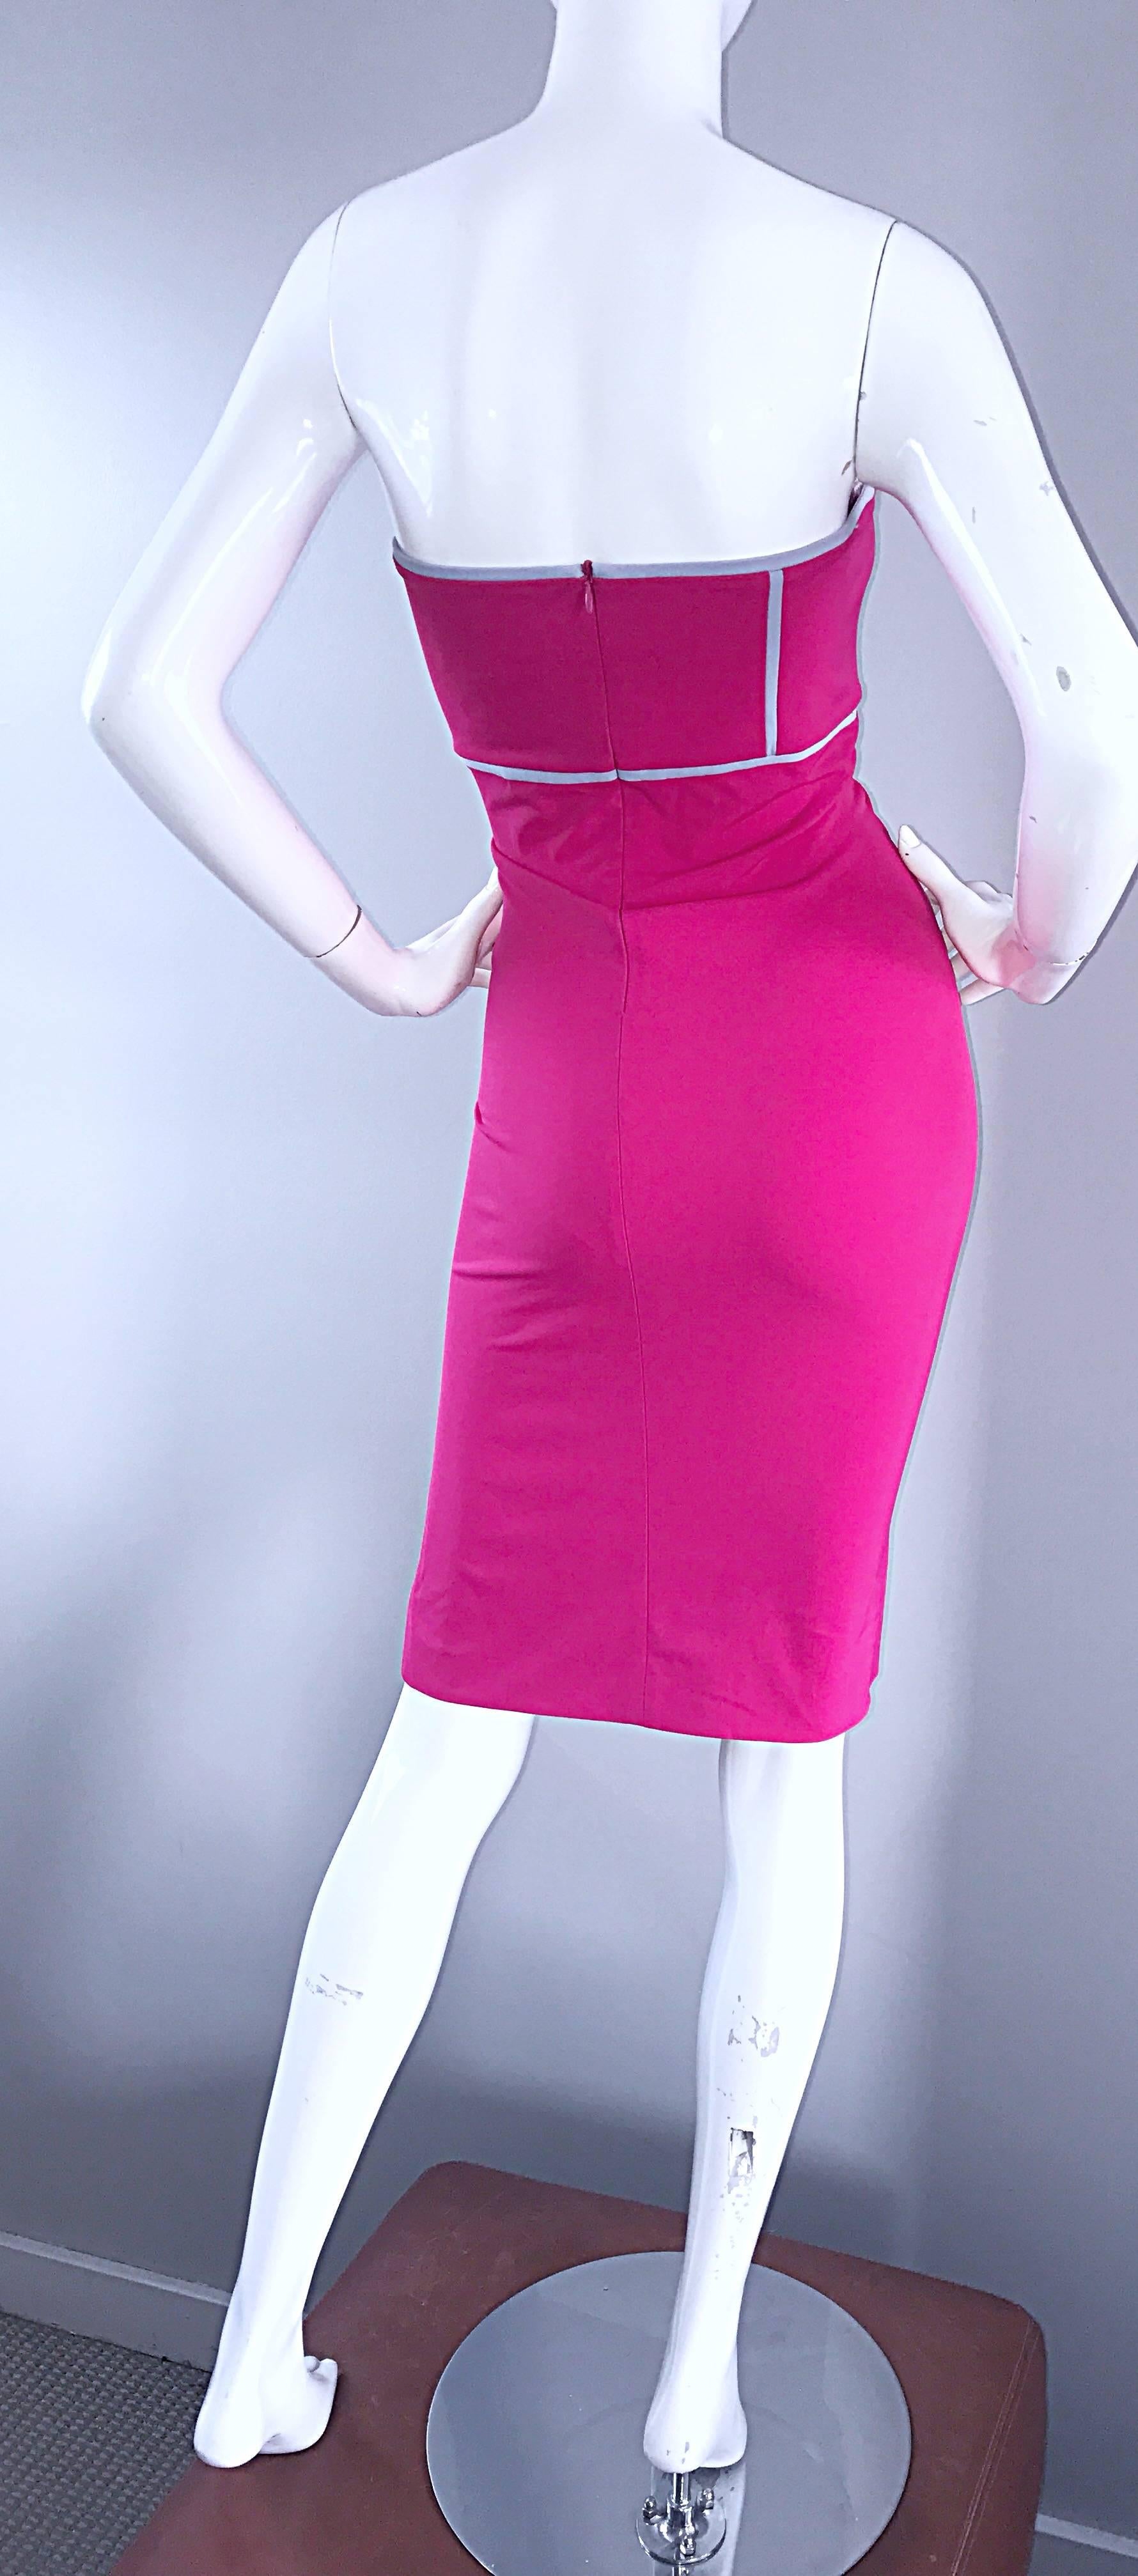 Sexy Vintage Gianni Versace Versus 1990s Hot Pink Fuchsia 90s Strapless Dress In Excellent Condition For Sale In San Diego, CA